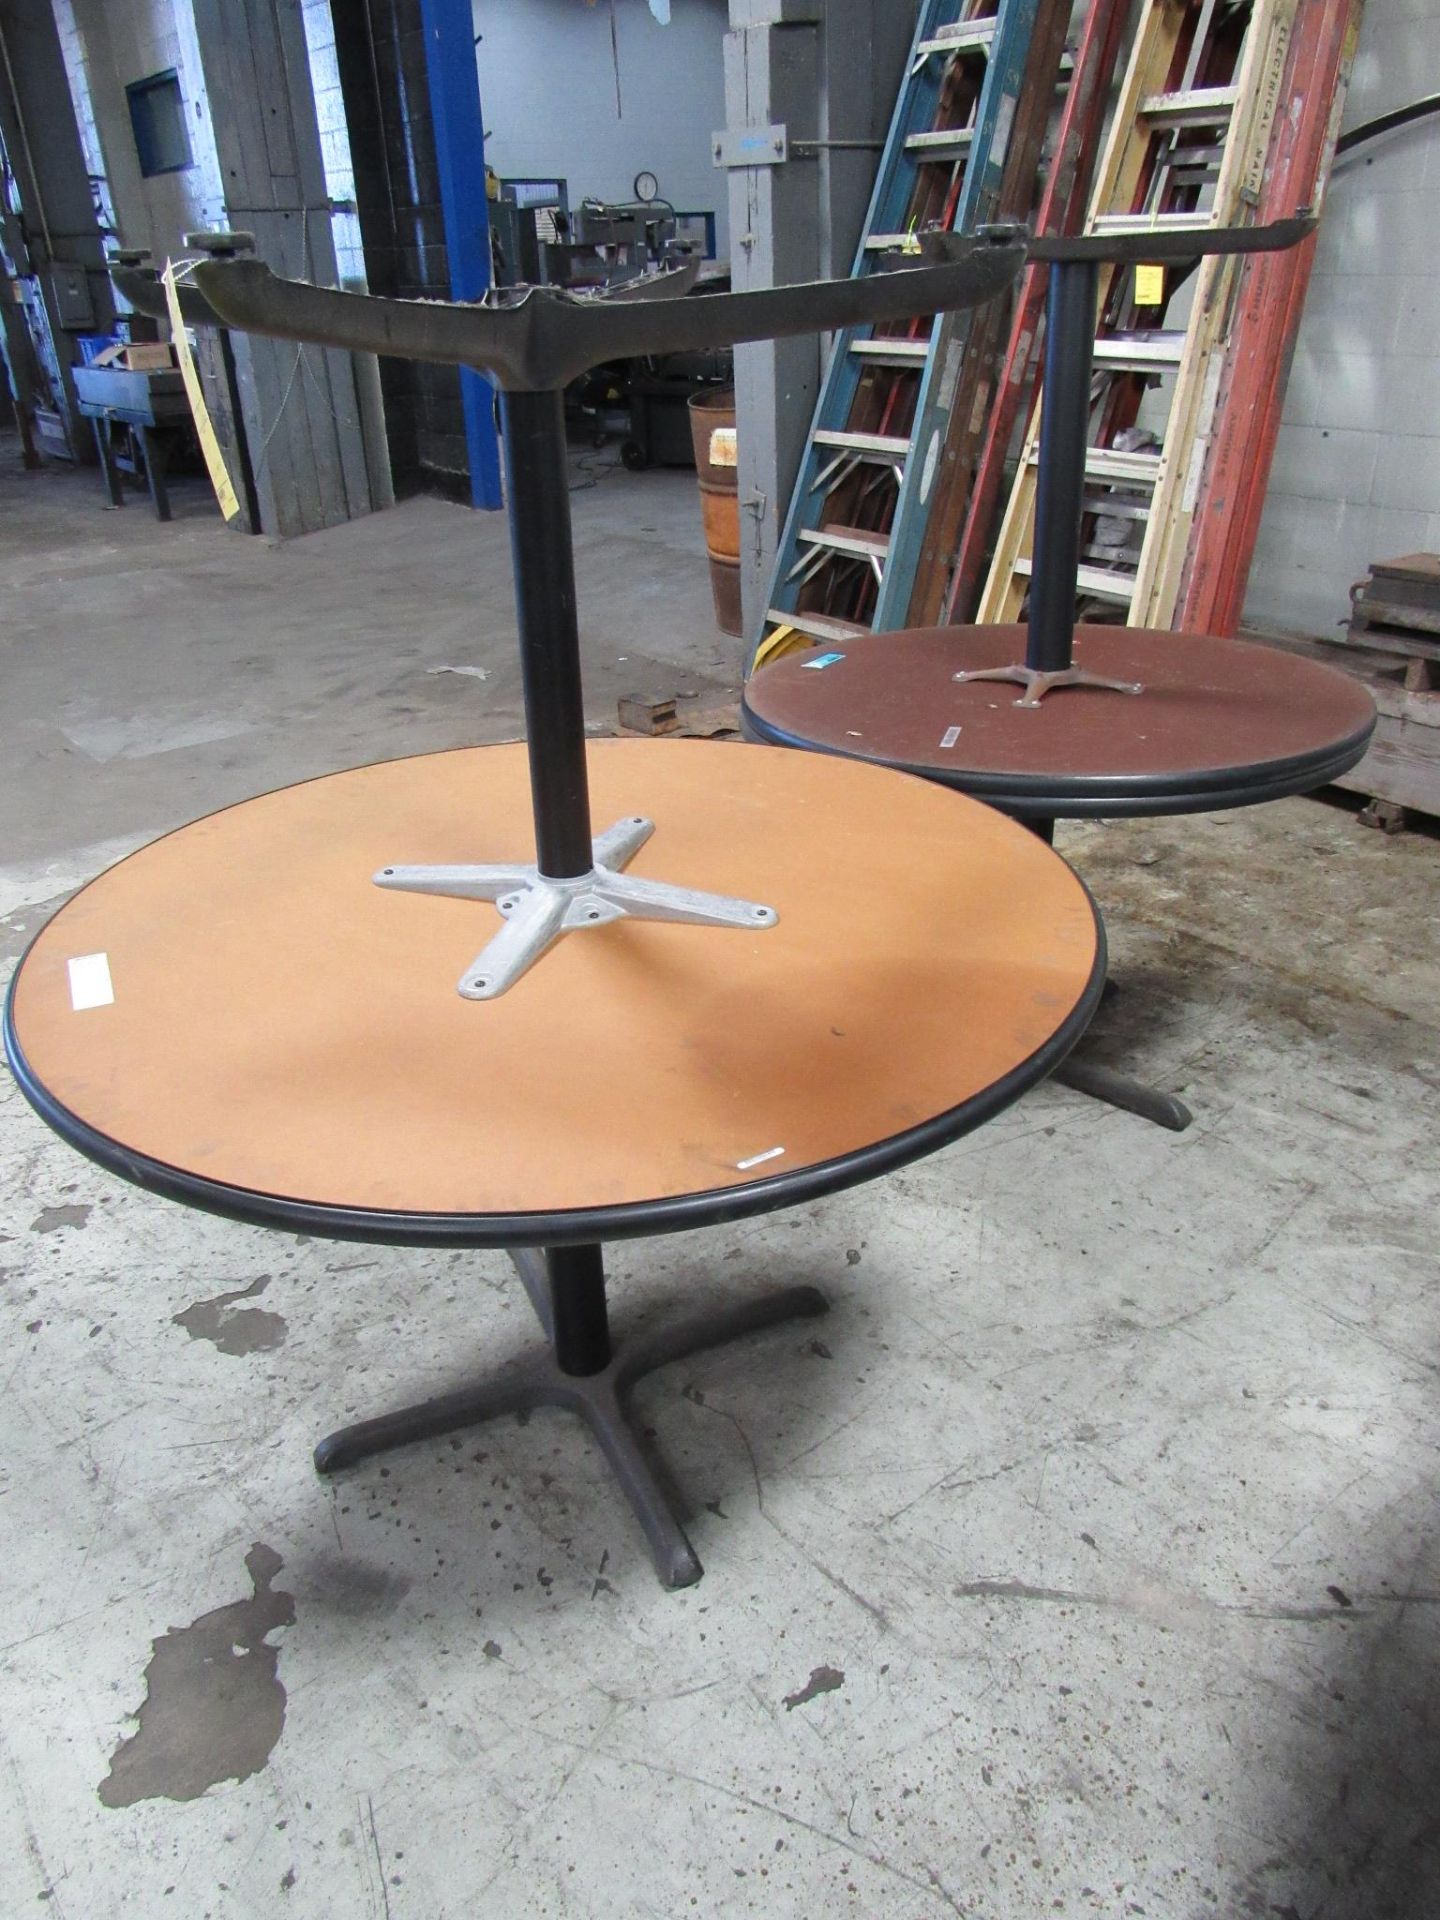 Lot of 4 42" Round Tables